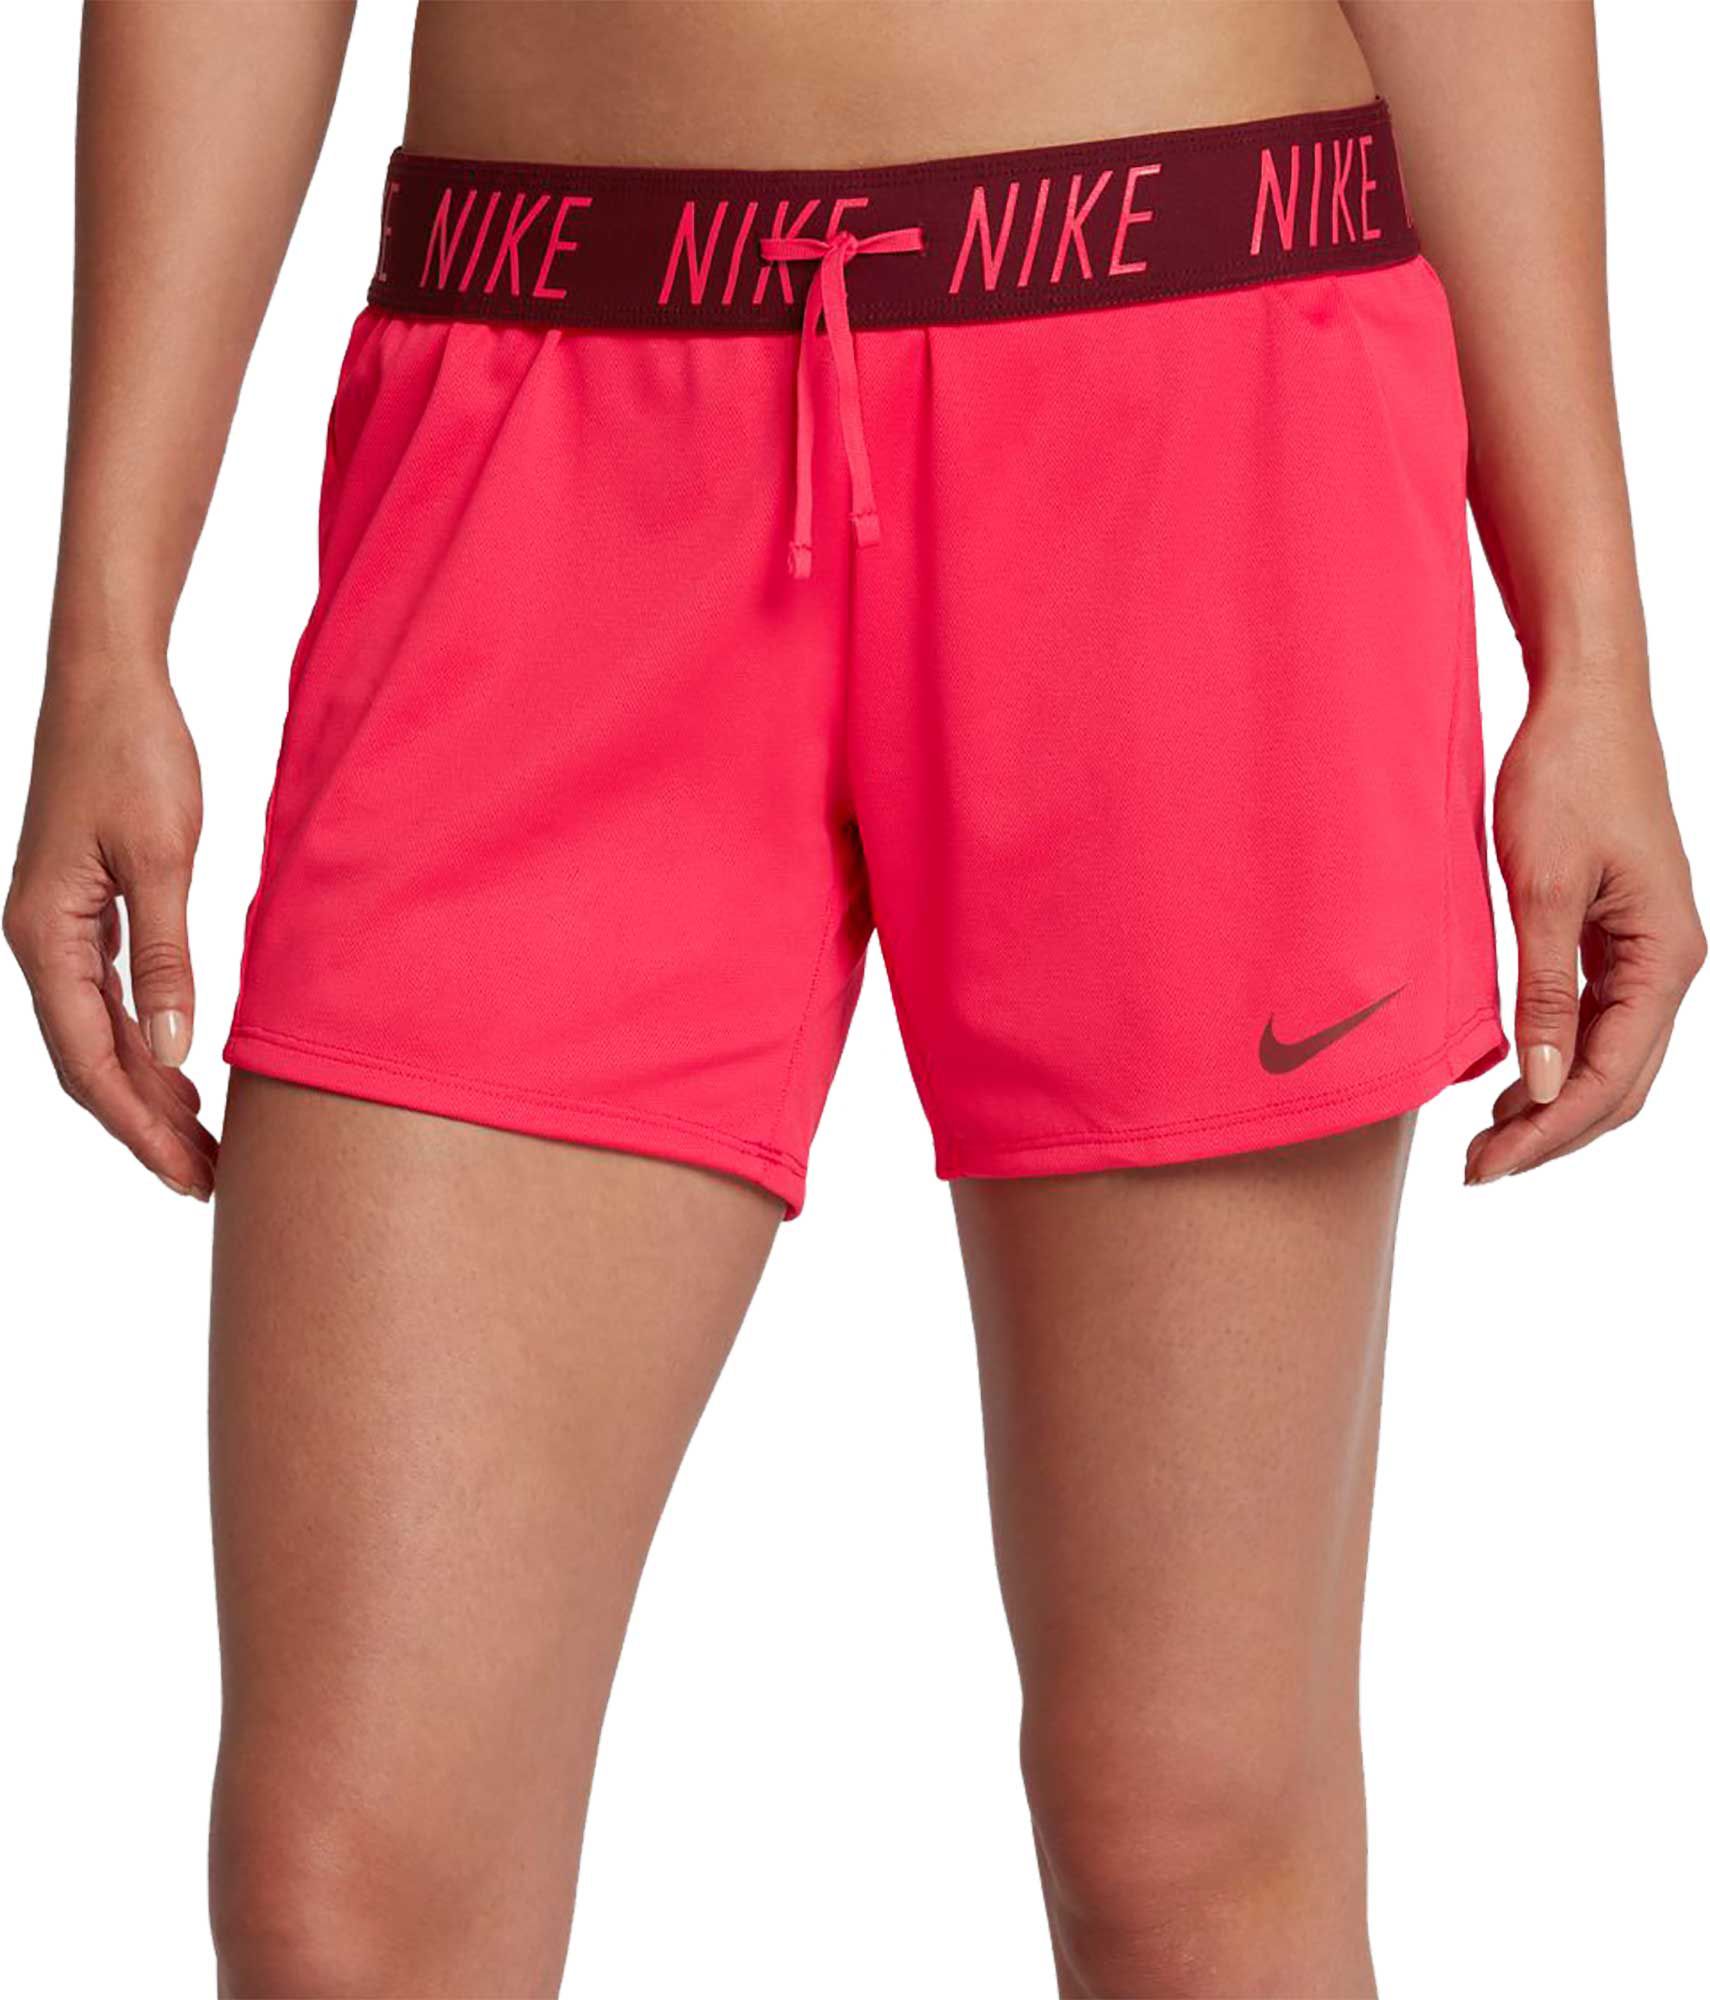 Women's Red Workout Shorts | DICK'S Sporting Goods